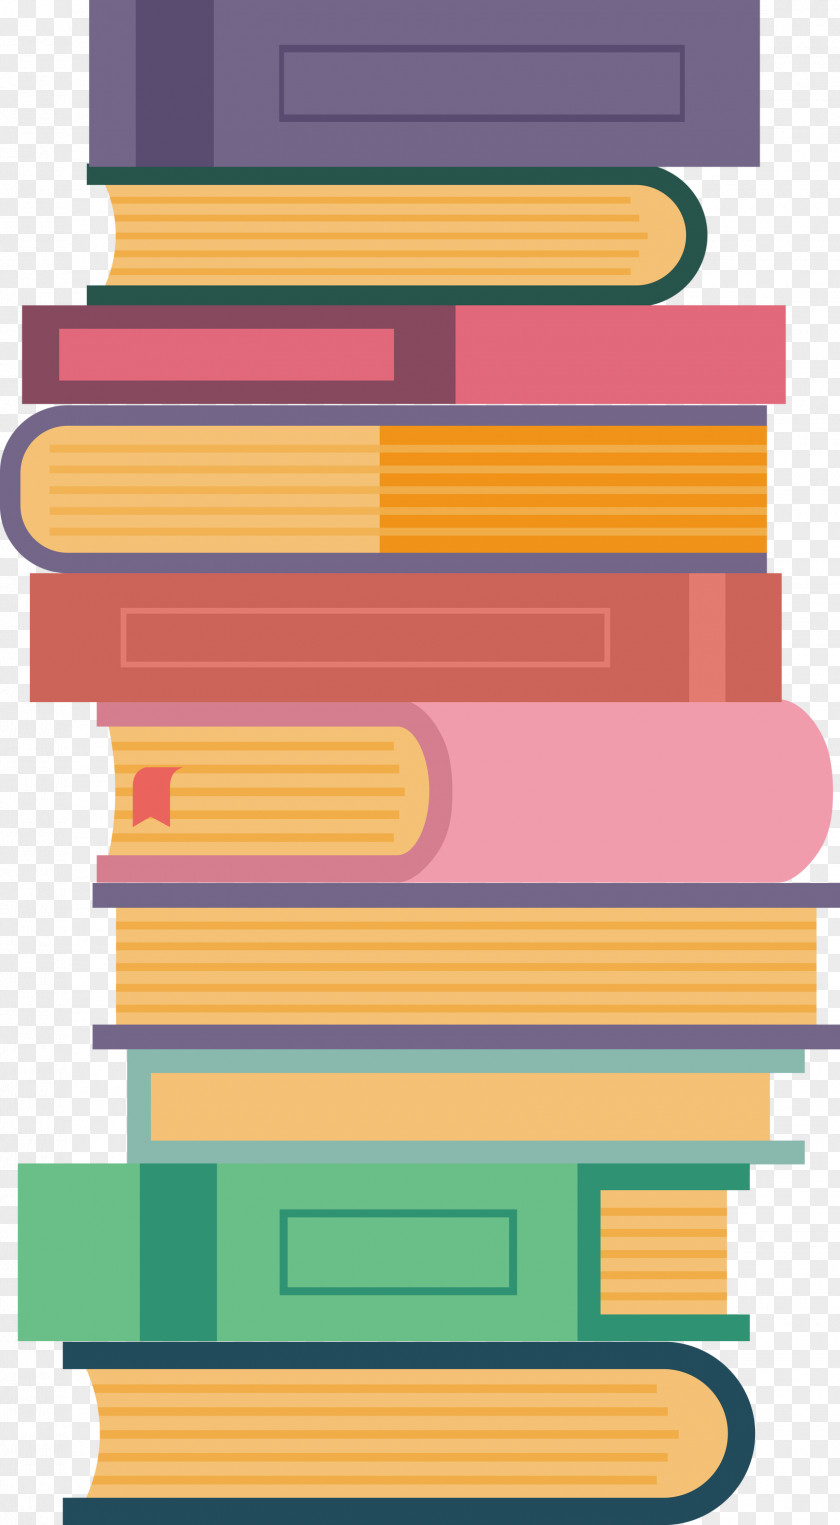 Stack Of Books PNG